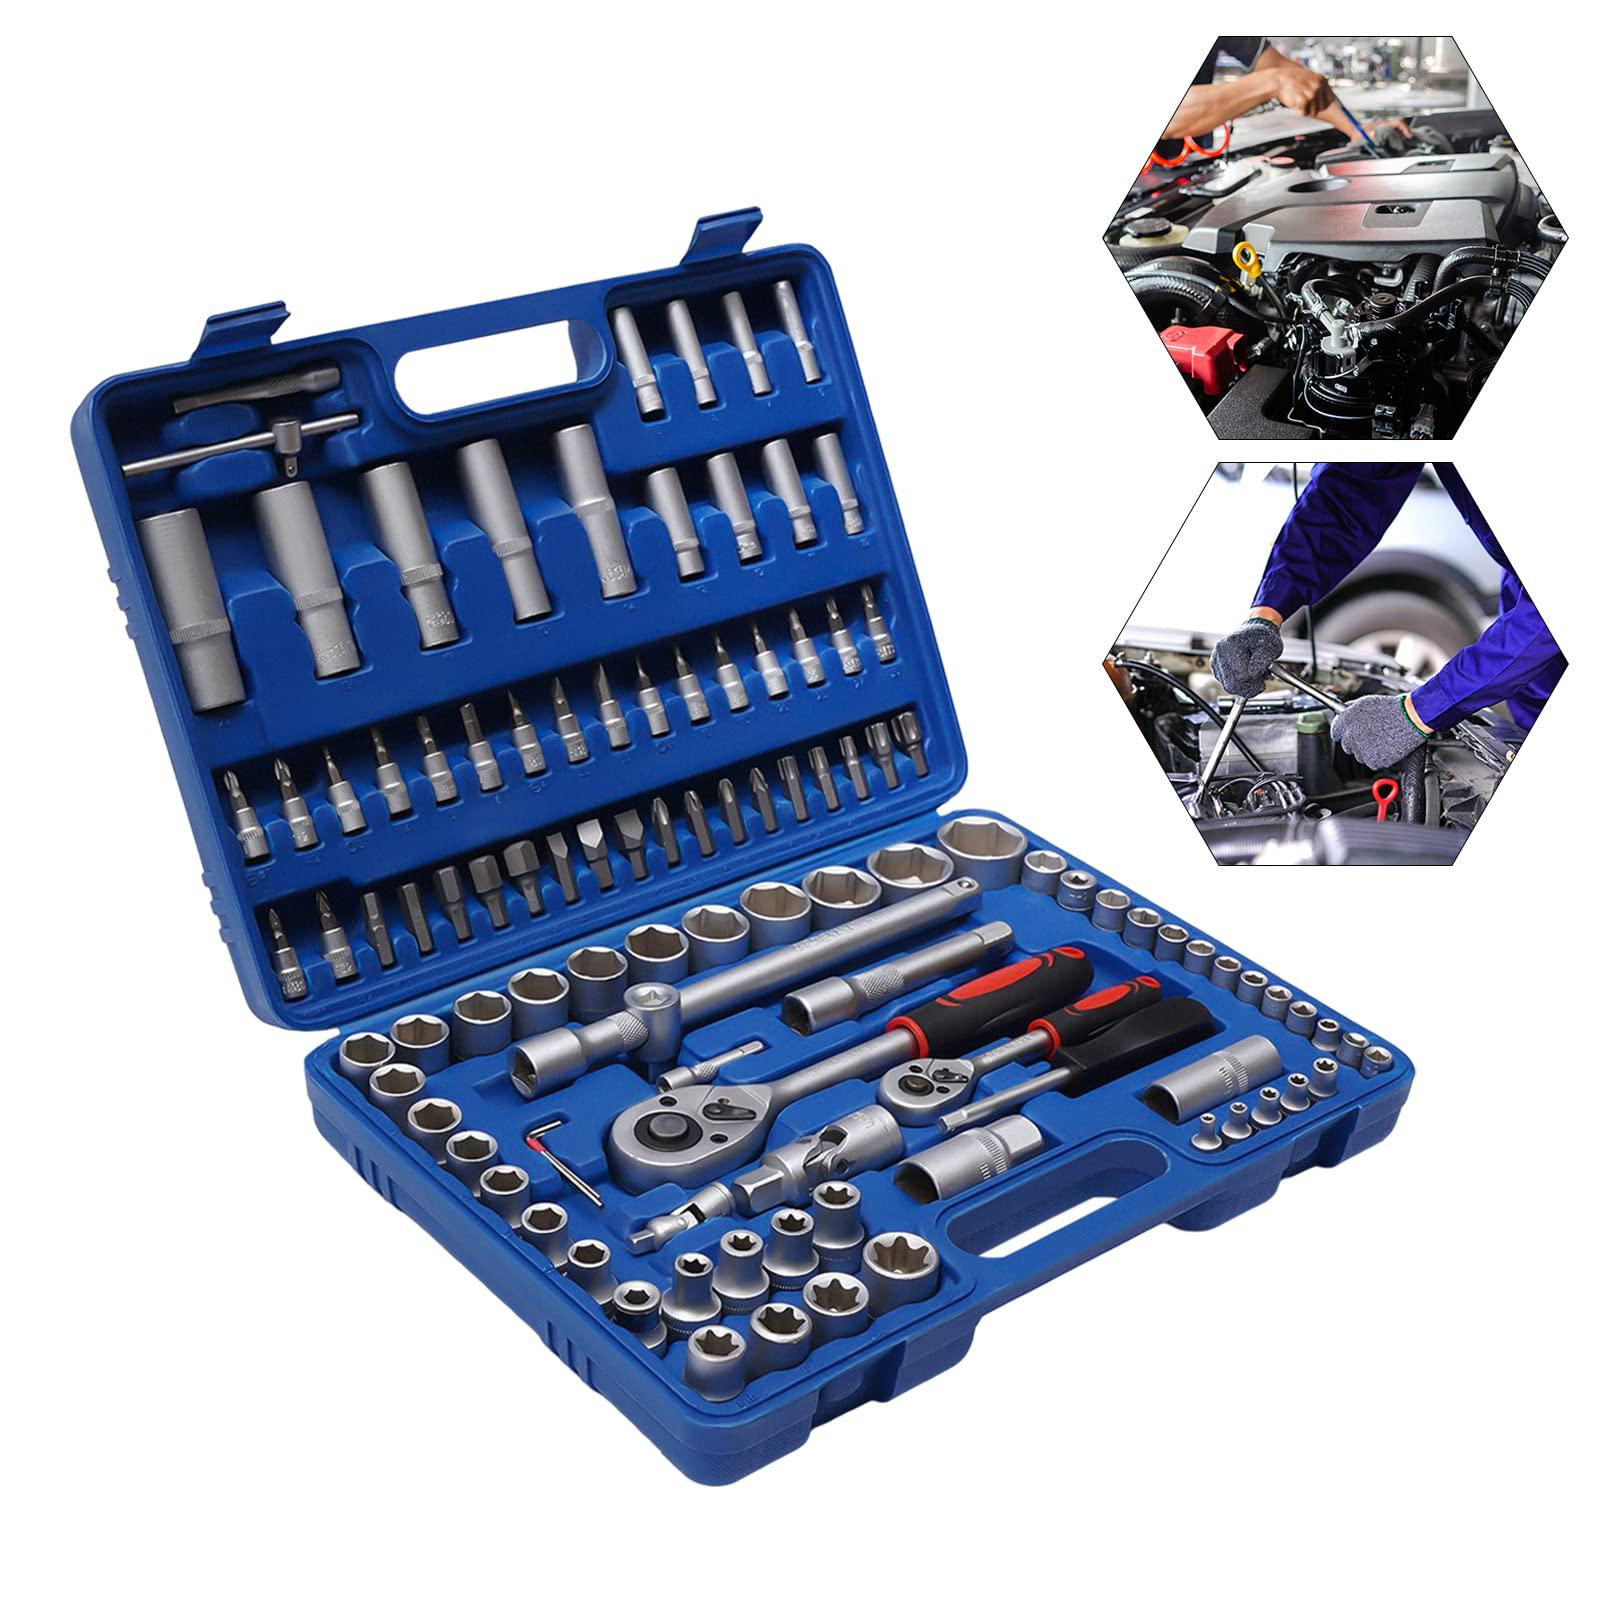 Mgorgeous 108piece socket wrench and metric 1/4 and 1/2 drive socket set, extension bars, sockets,quick release reversible ratchet wren